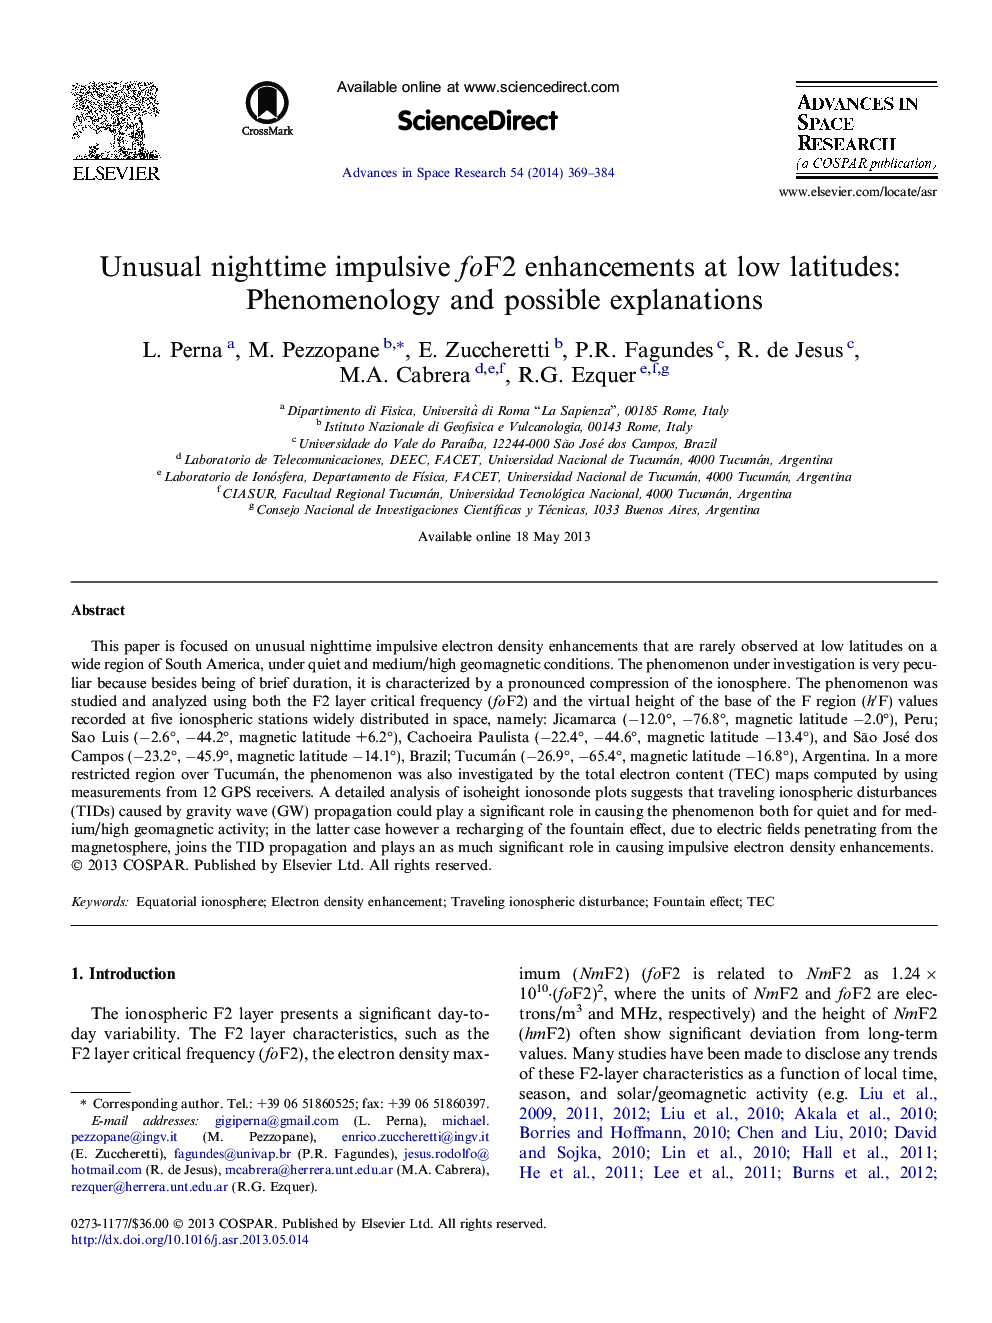 Unusual nighttime impulsive foF2 enhancements at low latitudes: Phenomenology and possible explanations